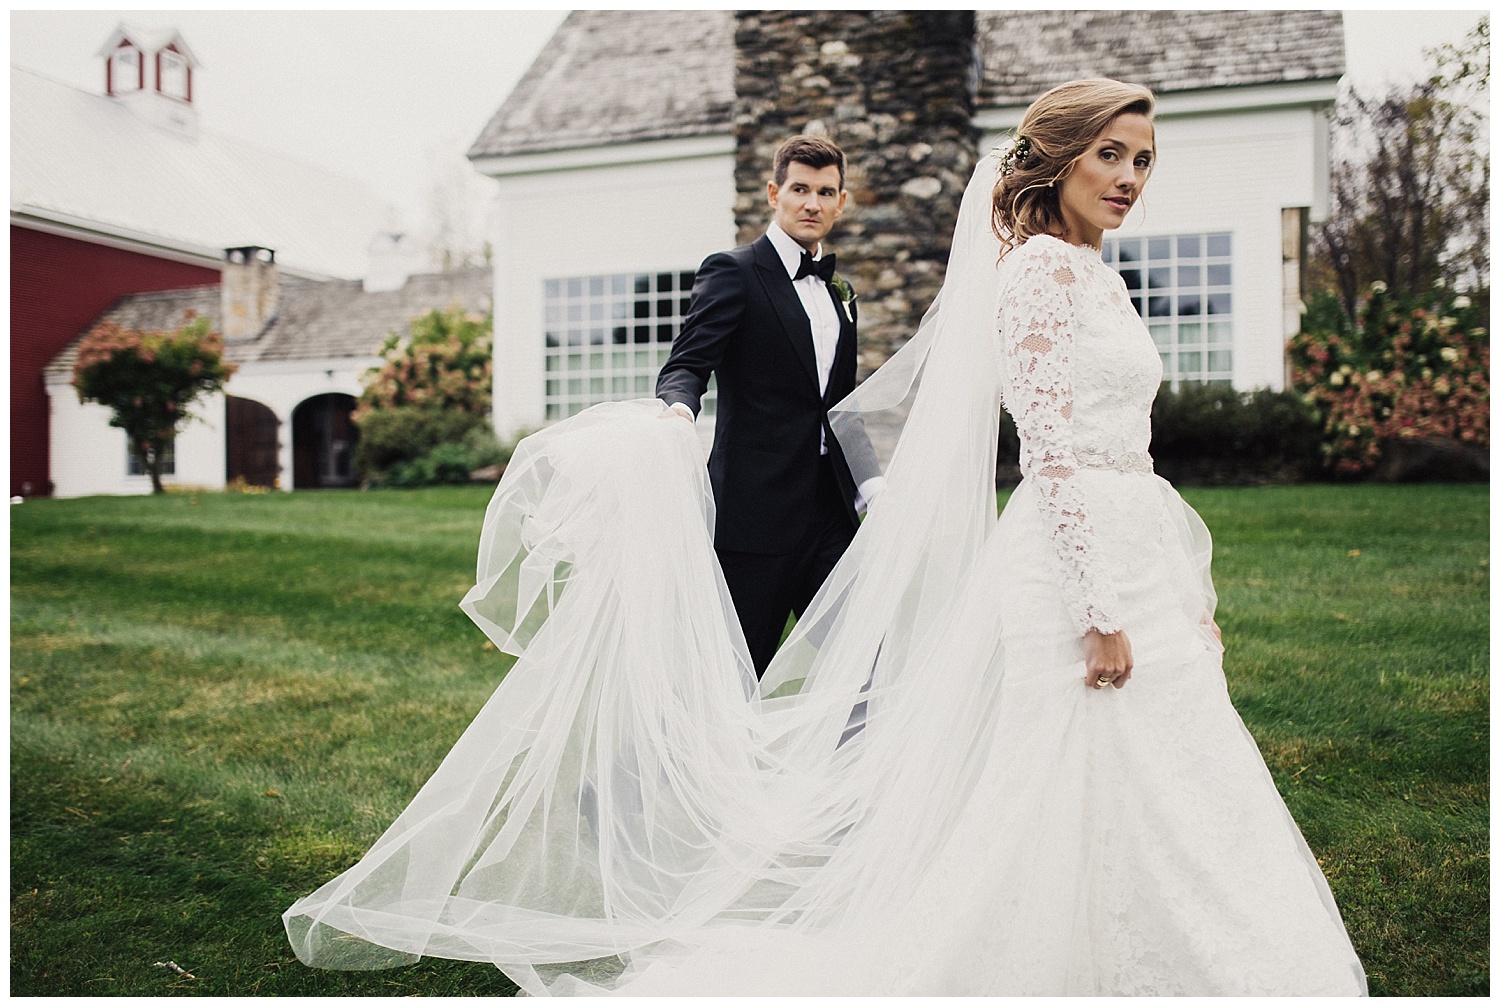 Editorial wedding photography in Vermont